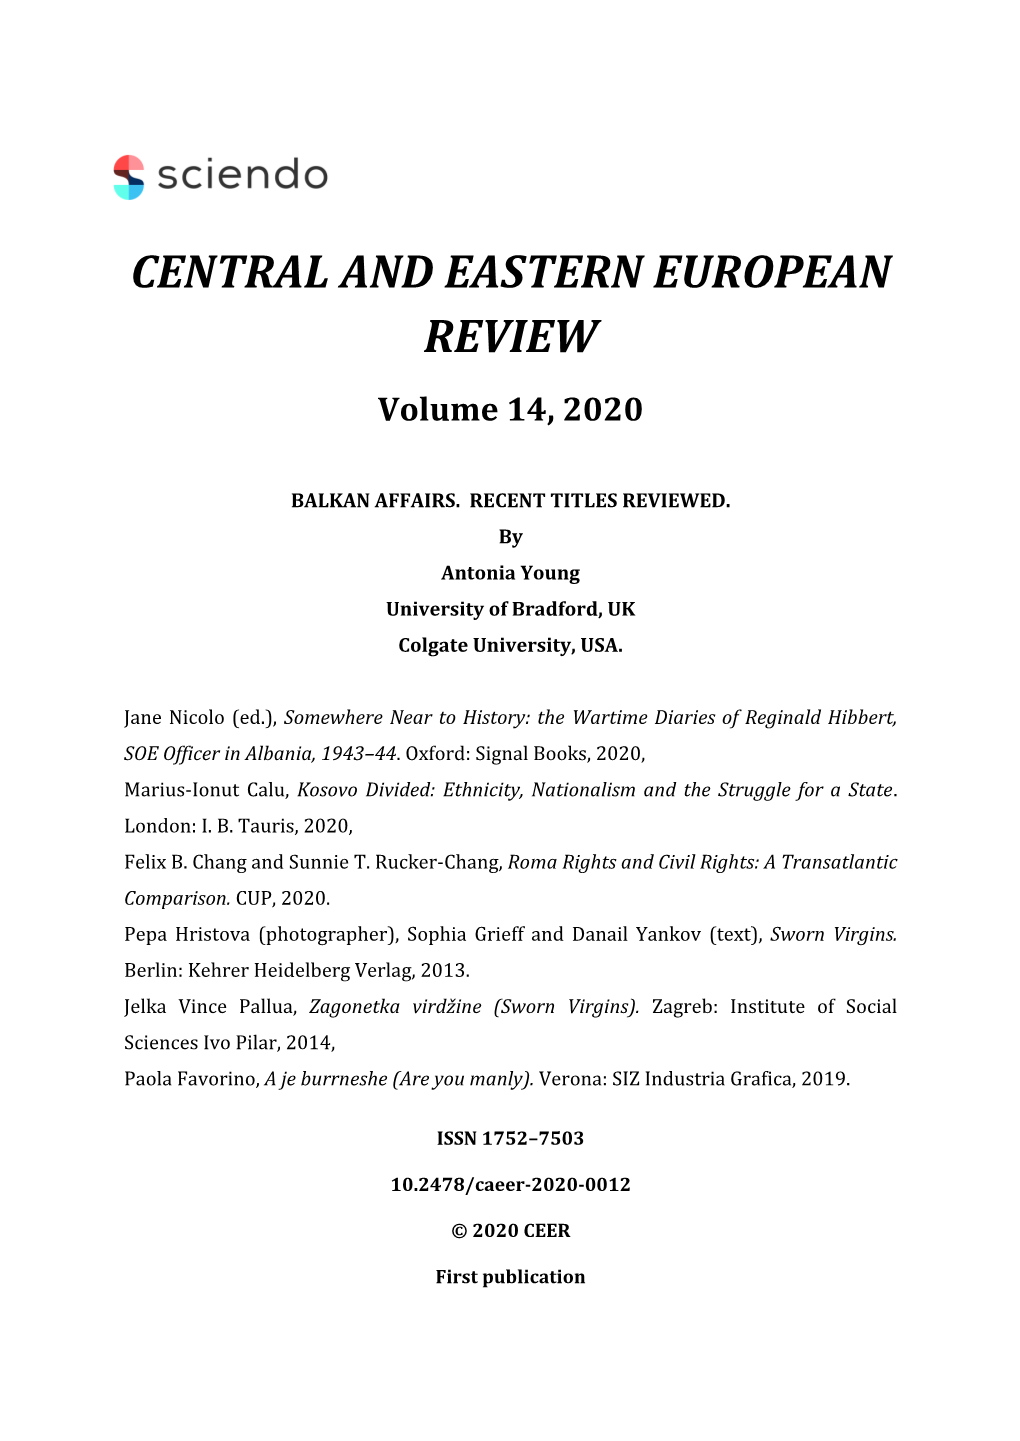 CENTRAL and EASTERN EUROPEAN REVIEW Volume 14, 2020